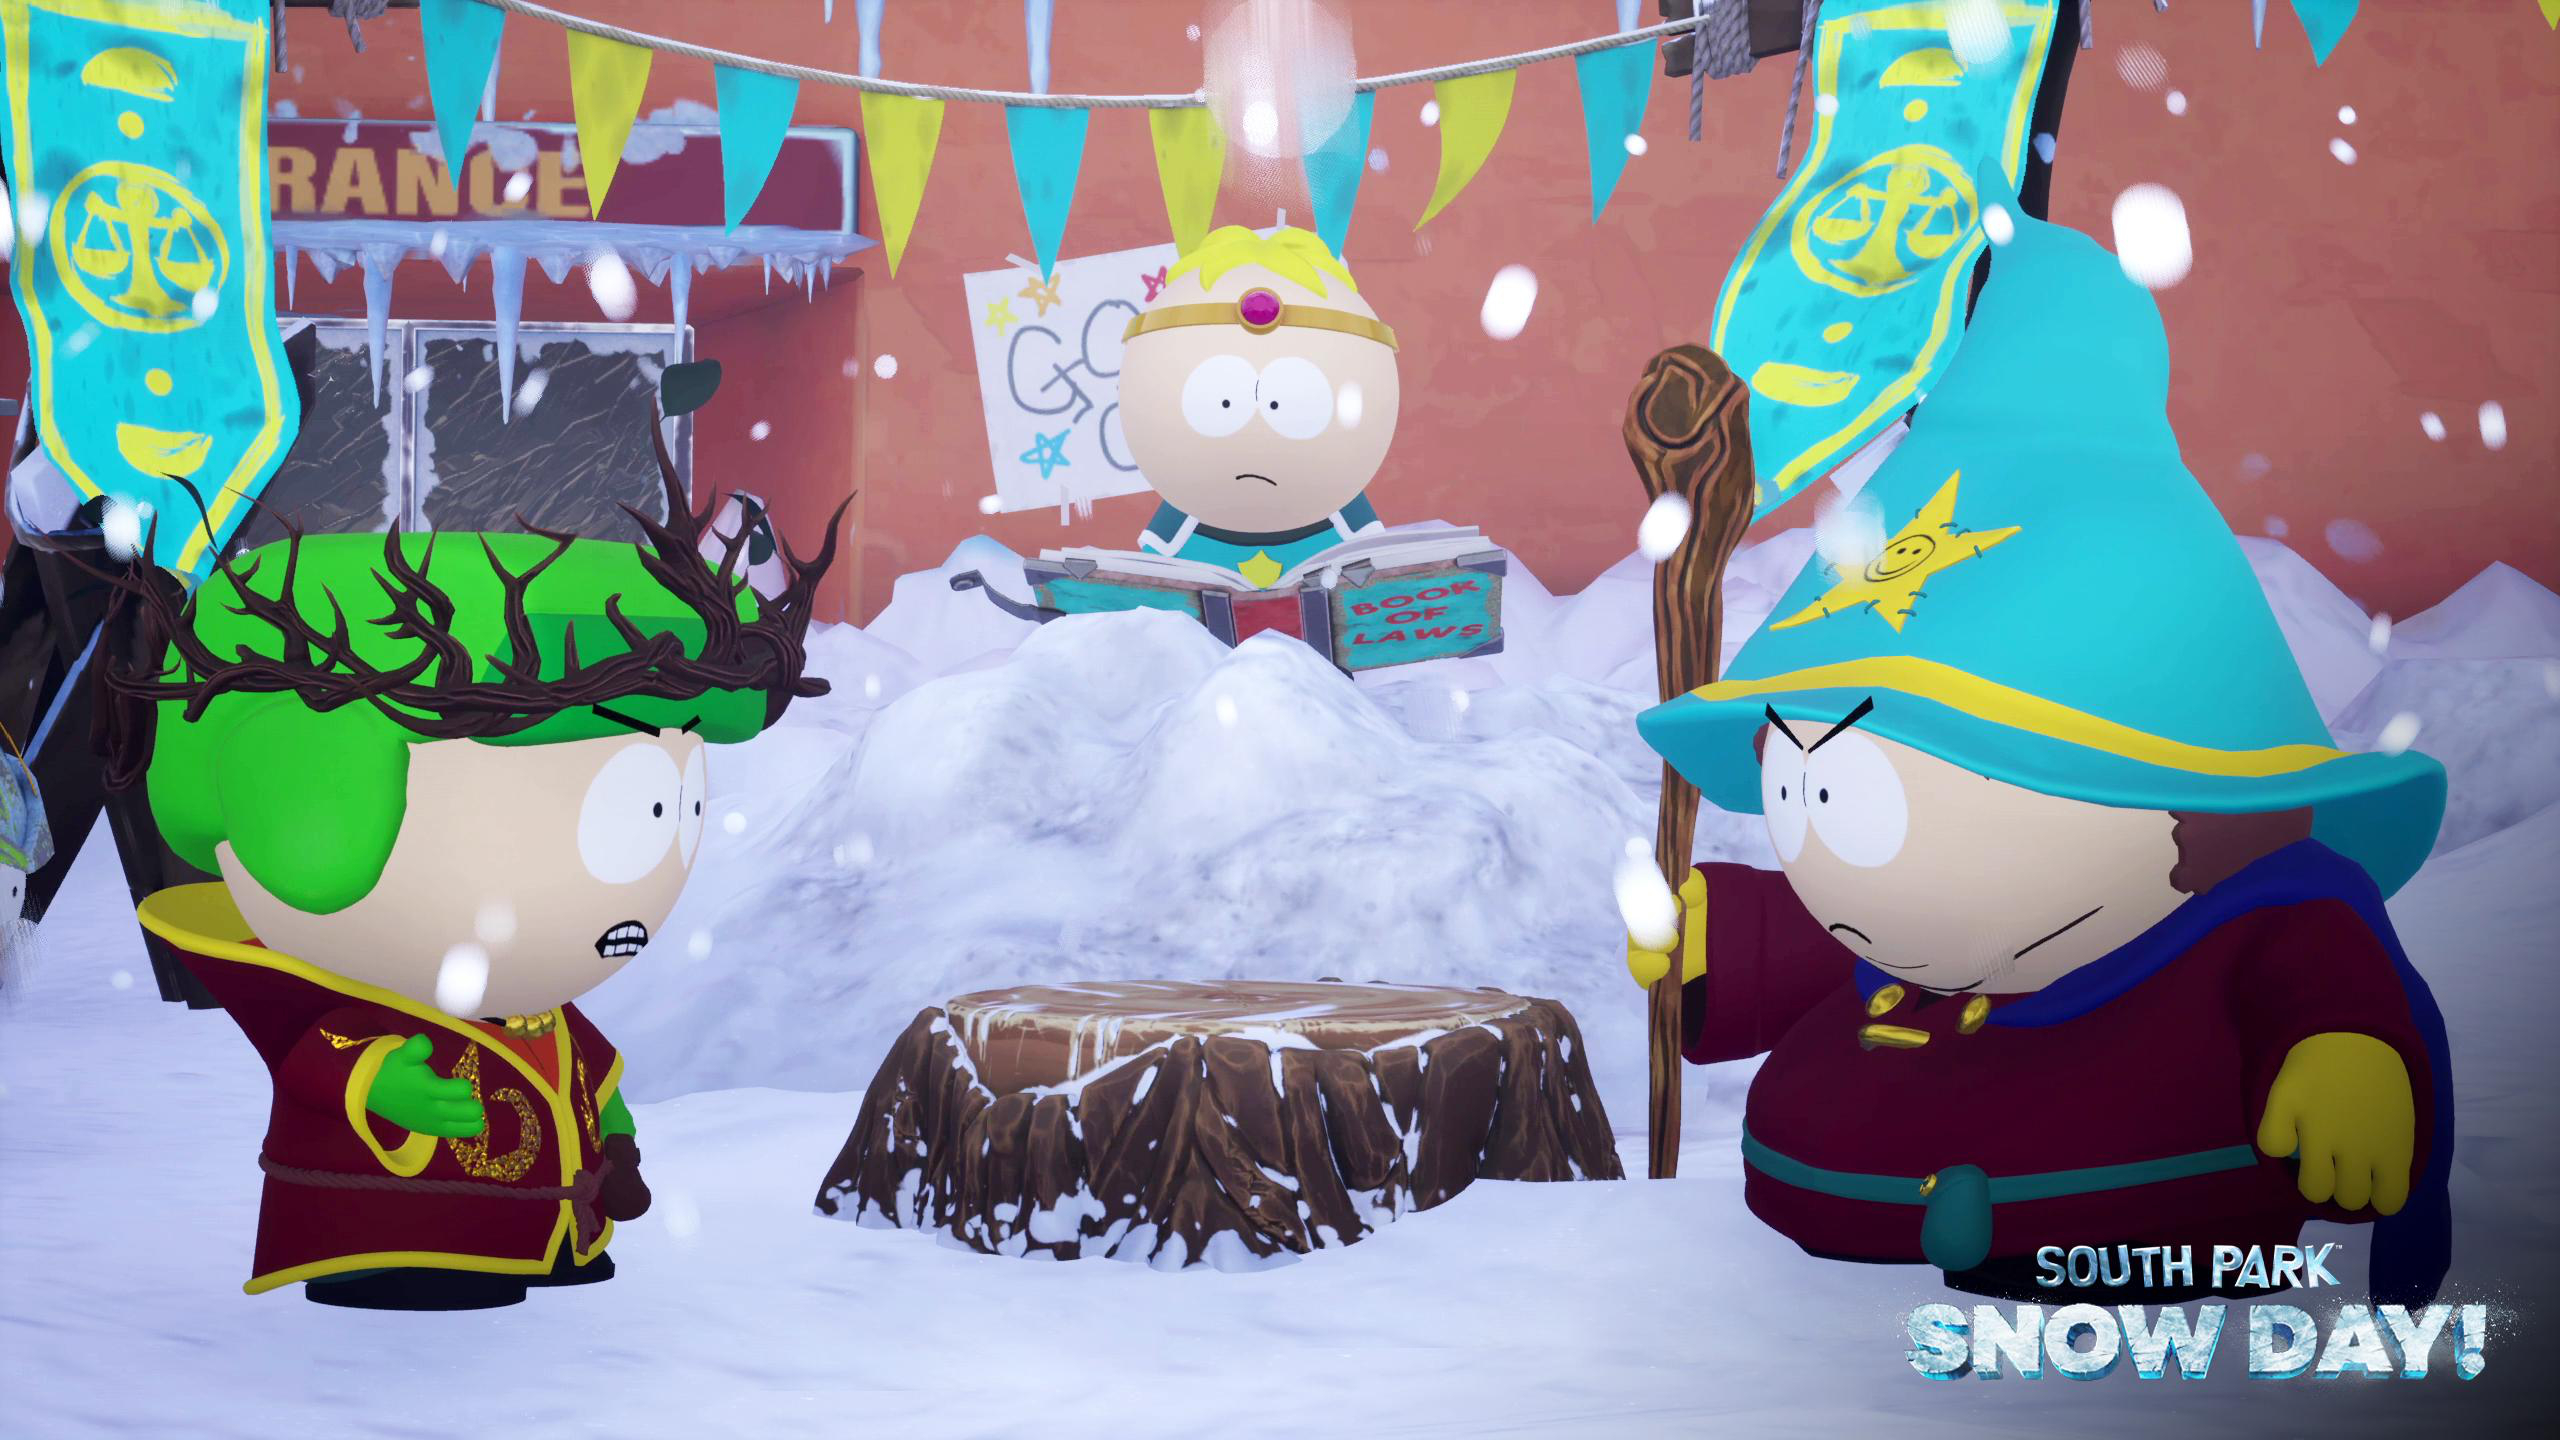 South Park: Snow Day! [PlayStation 5] 